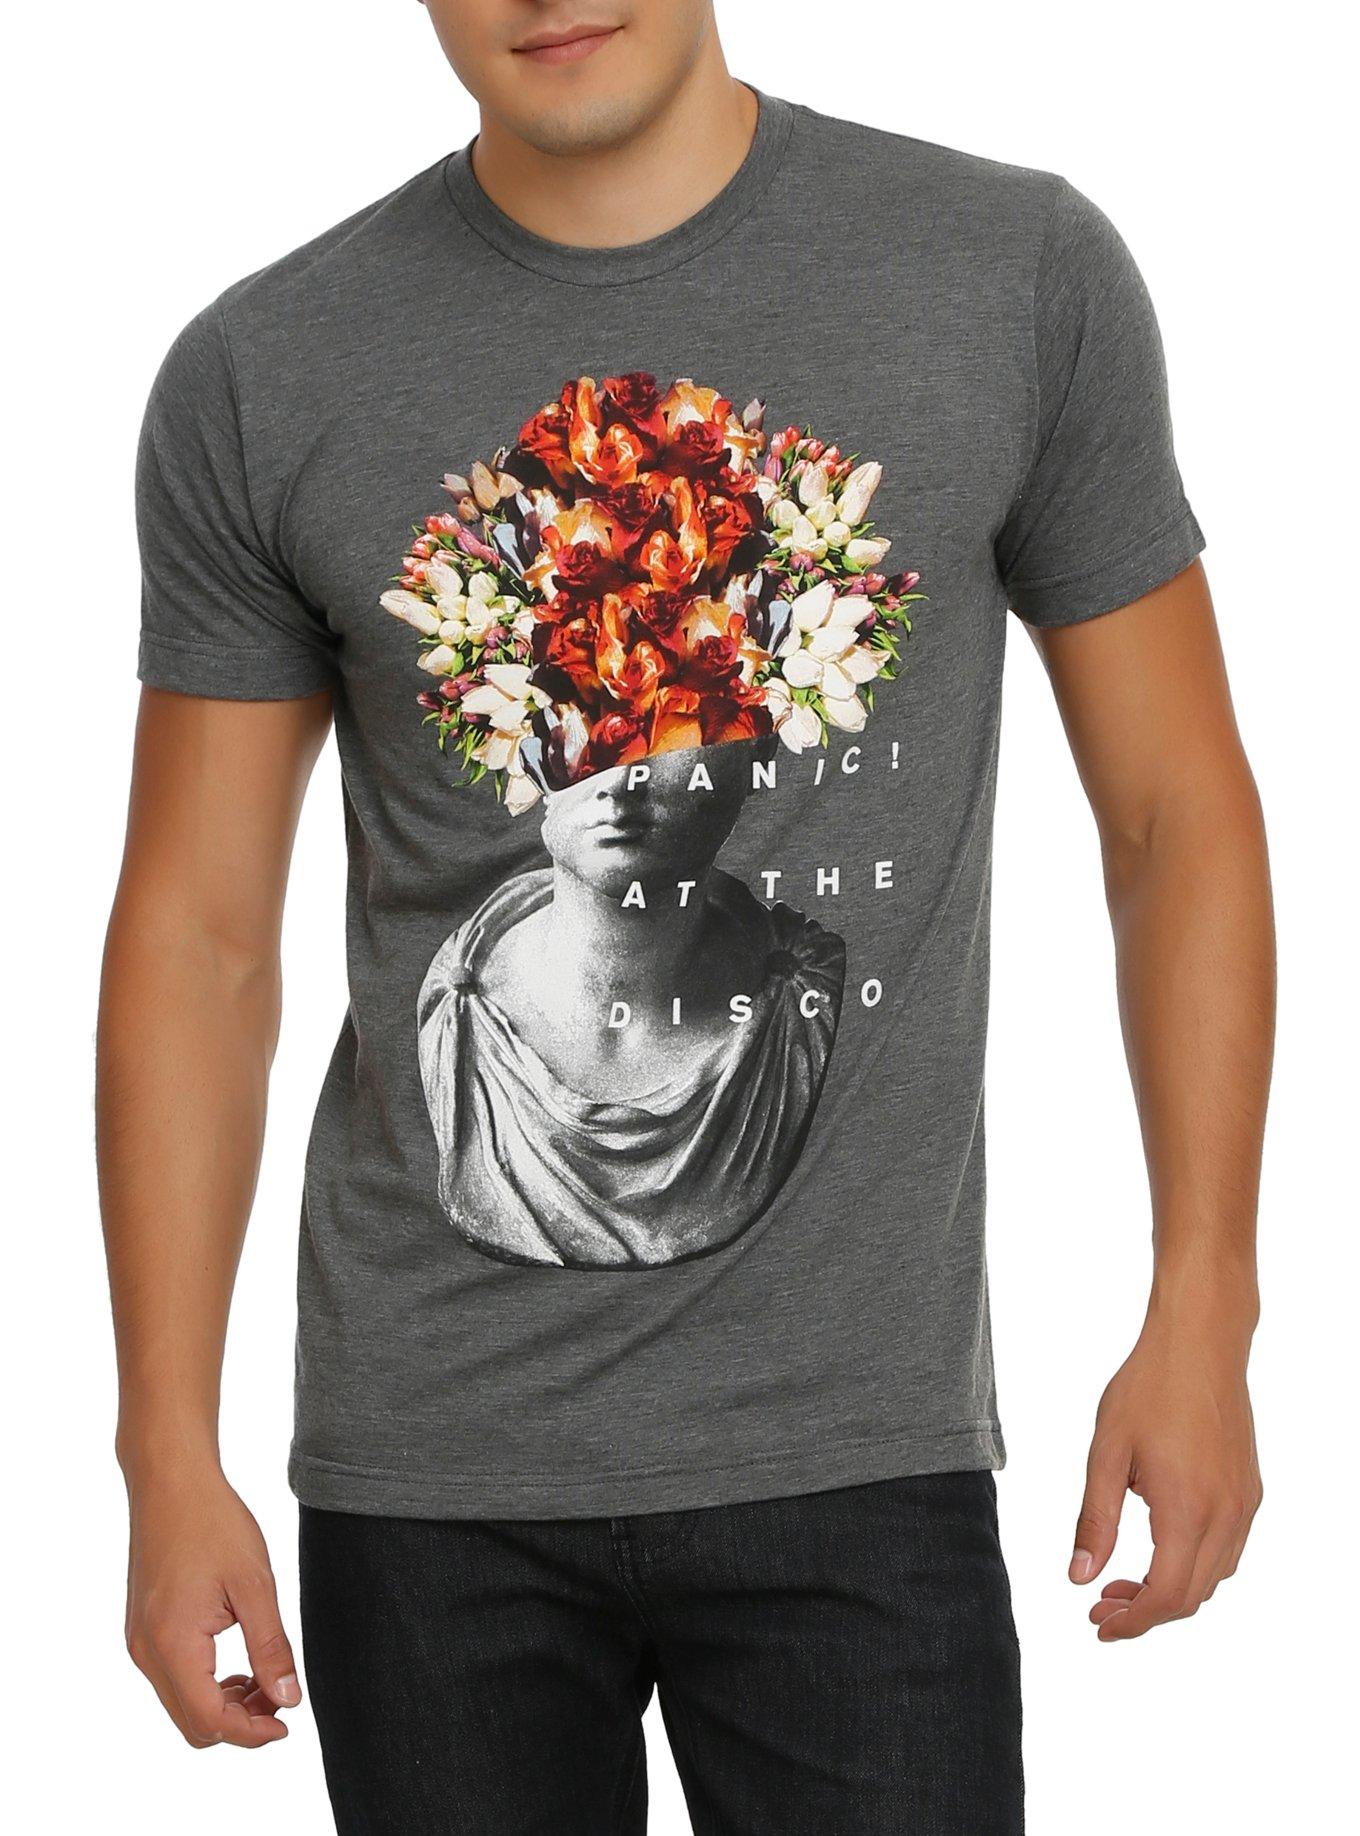 Panic! At The Disco Flower Head T-Shirt | Hot Topic